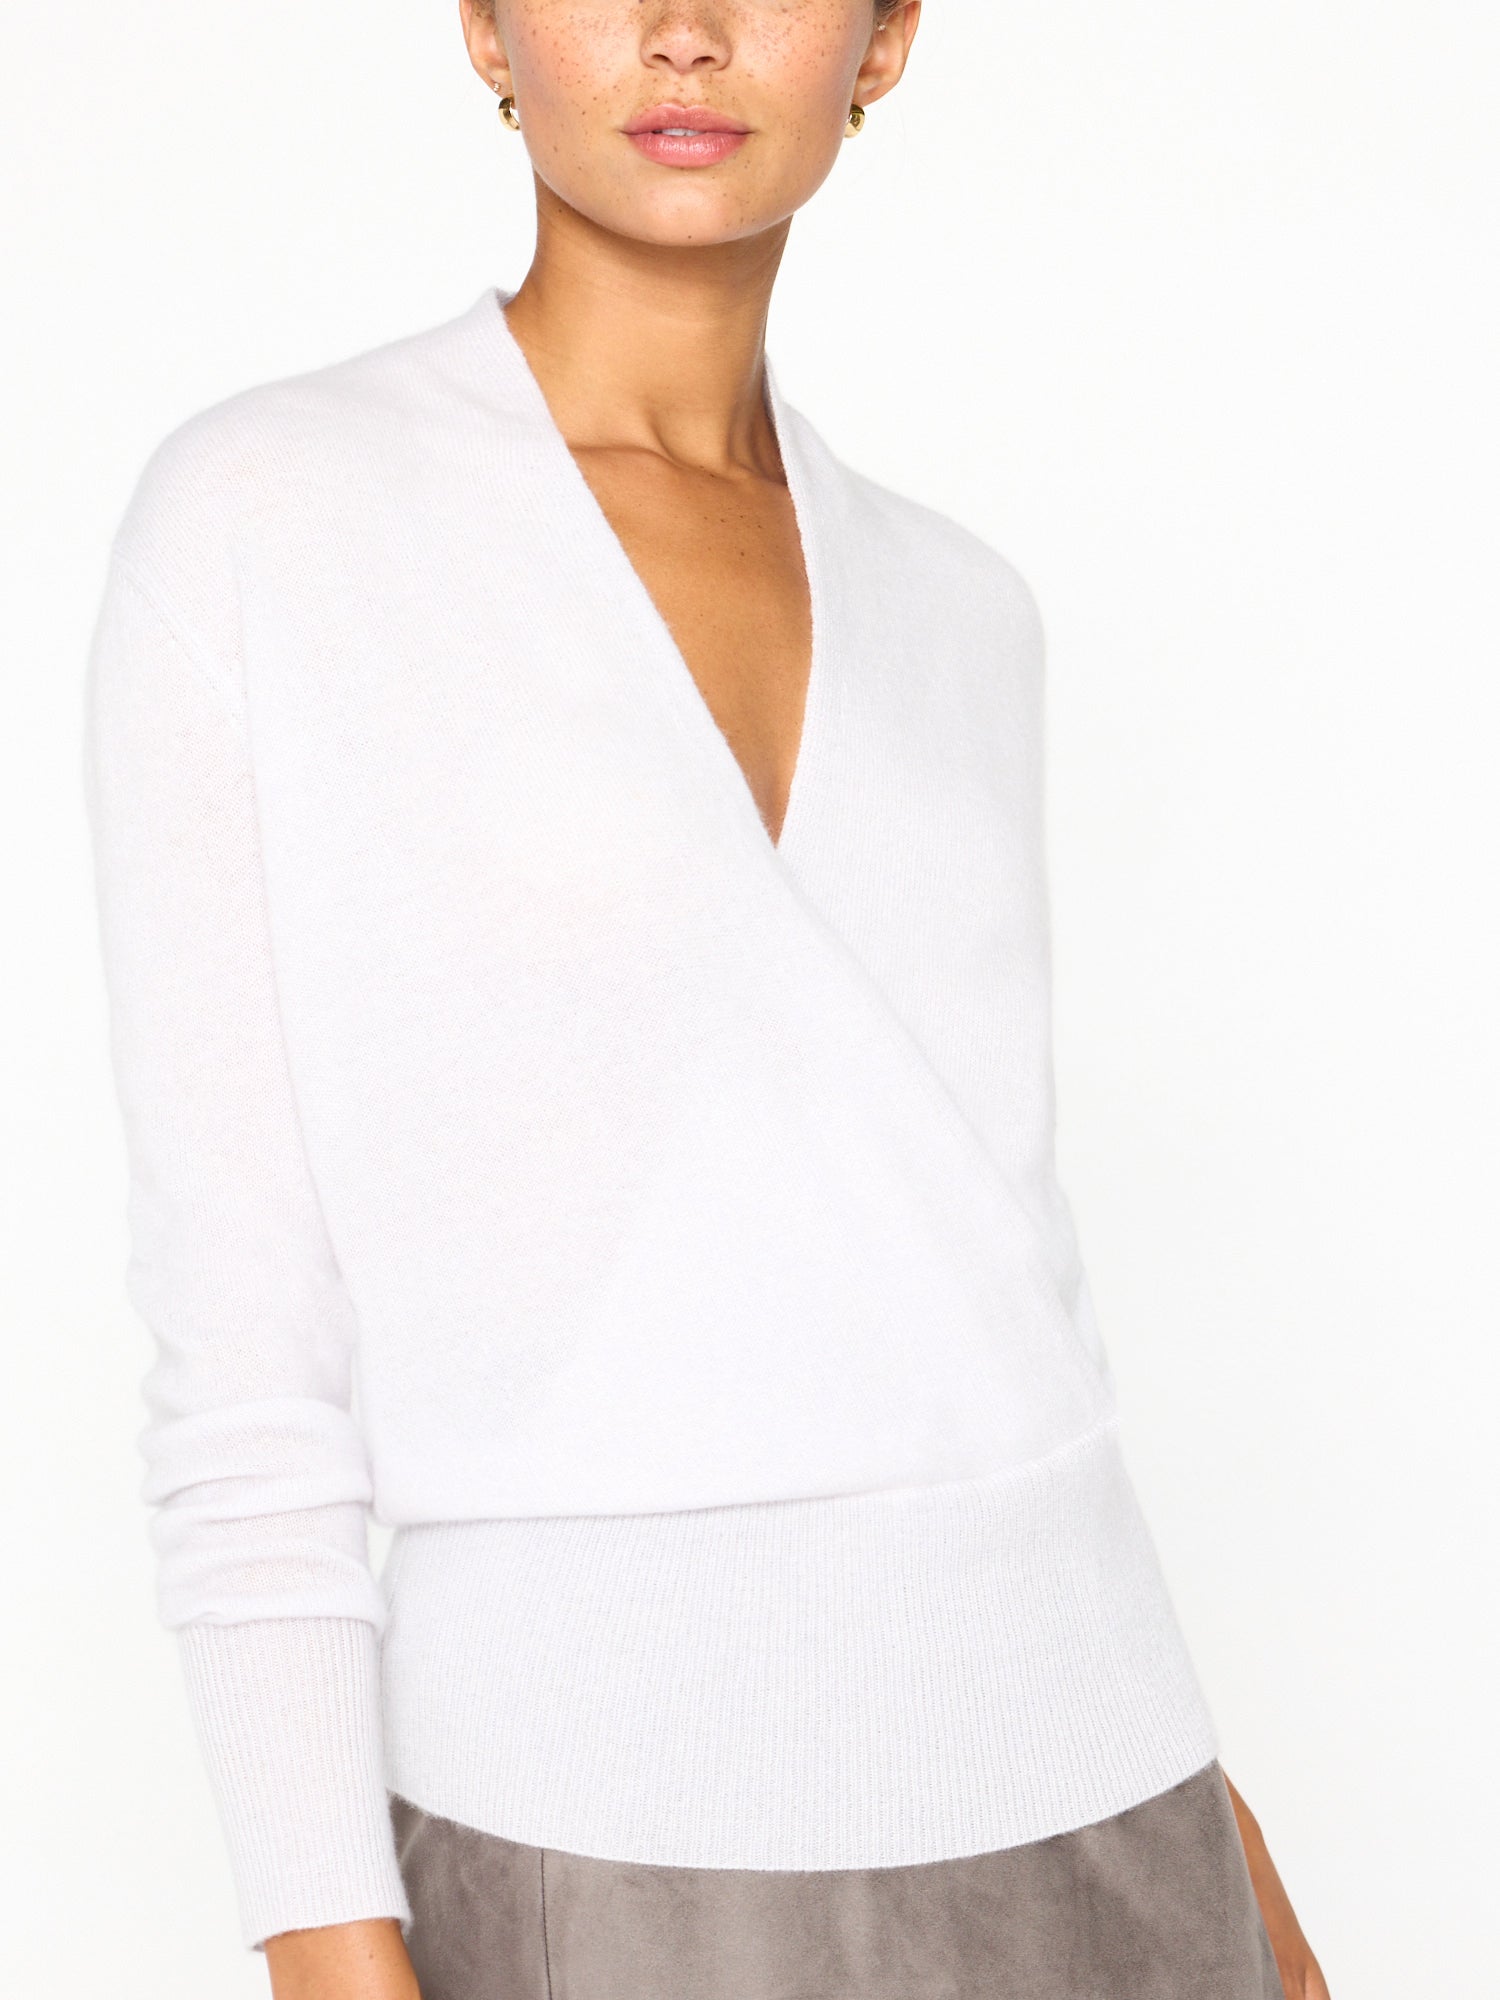 Phinneas cashmere v-neck white wrap sweater front view 3